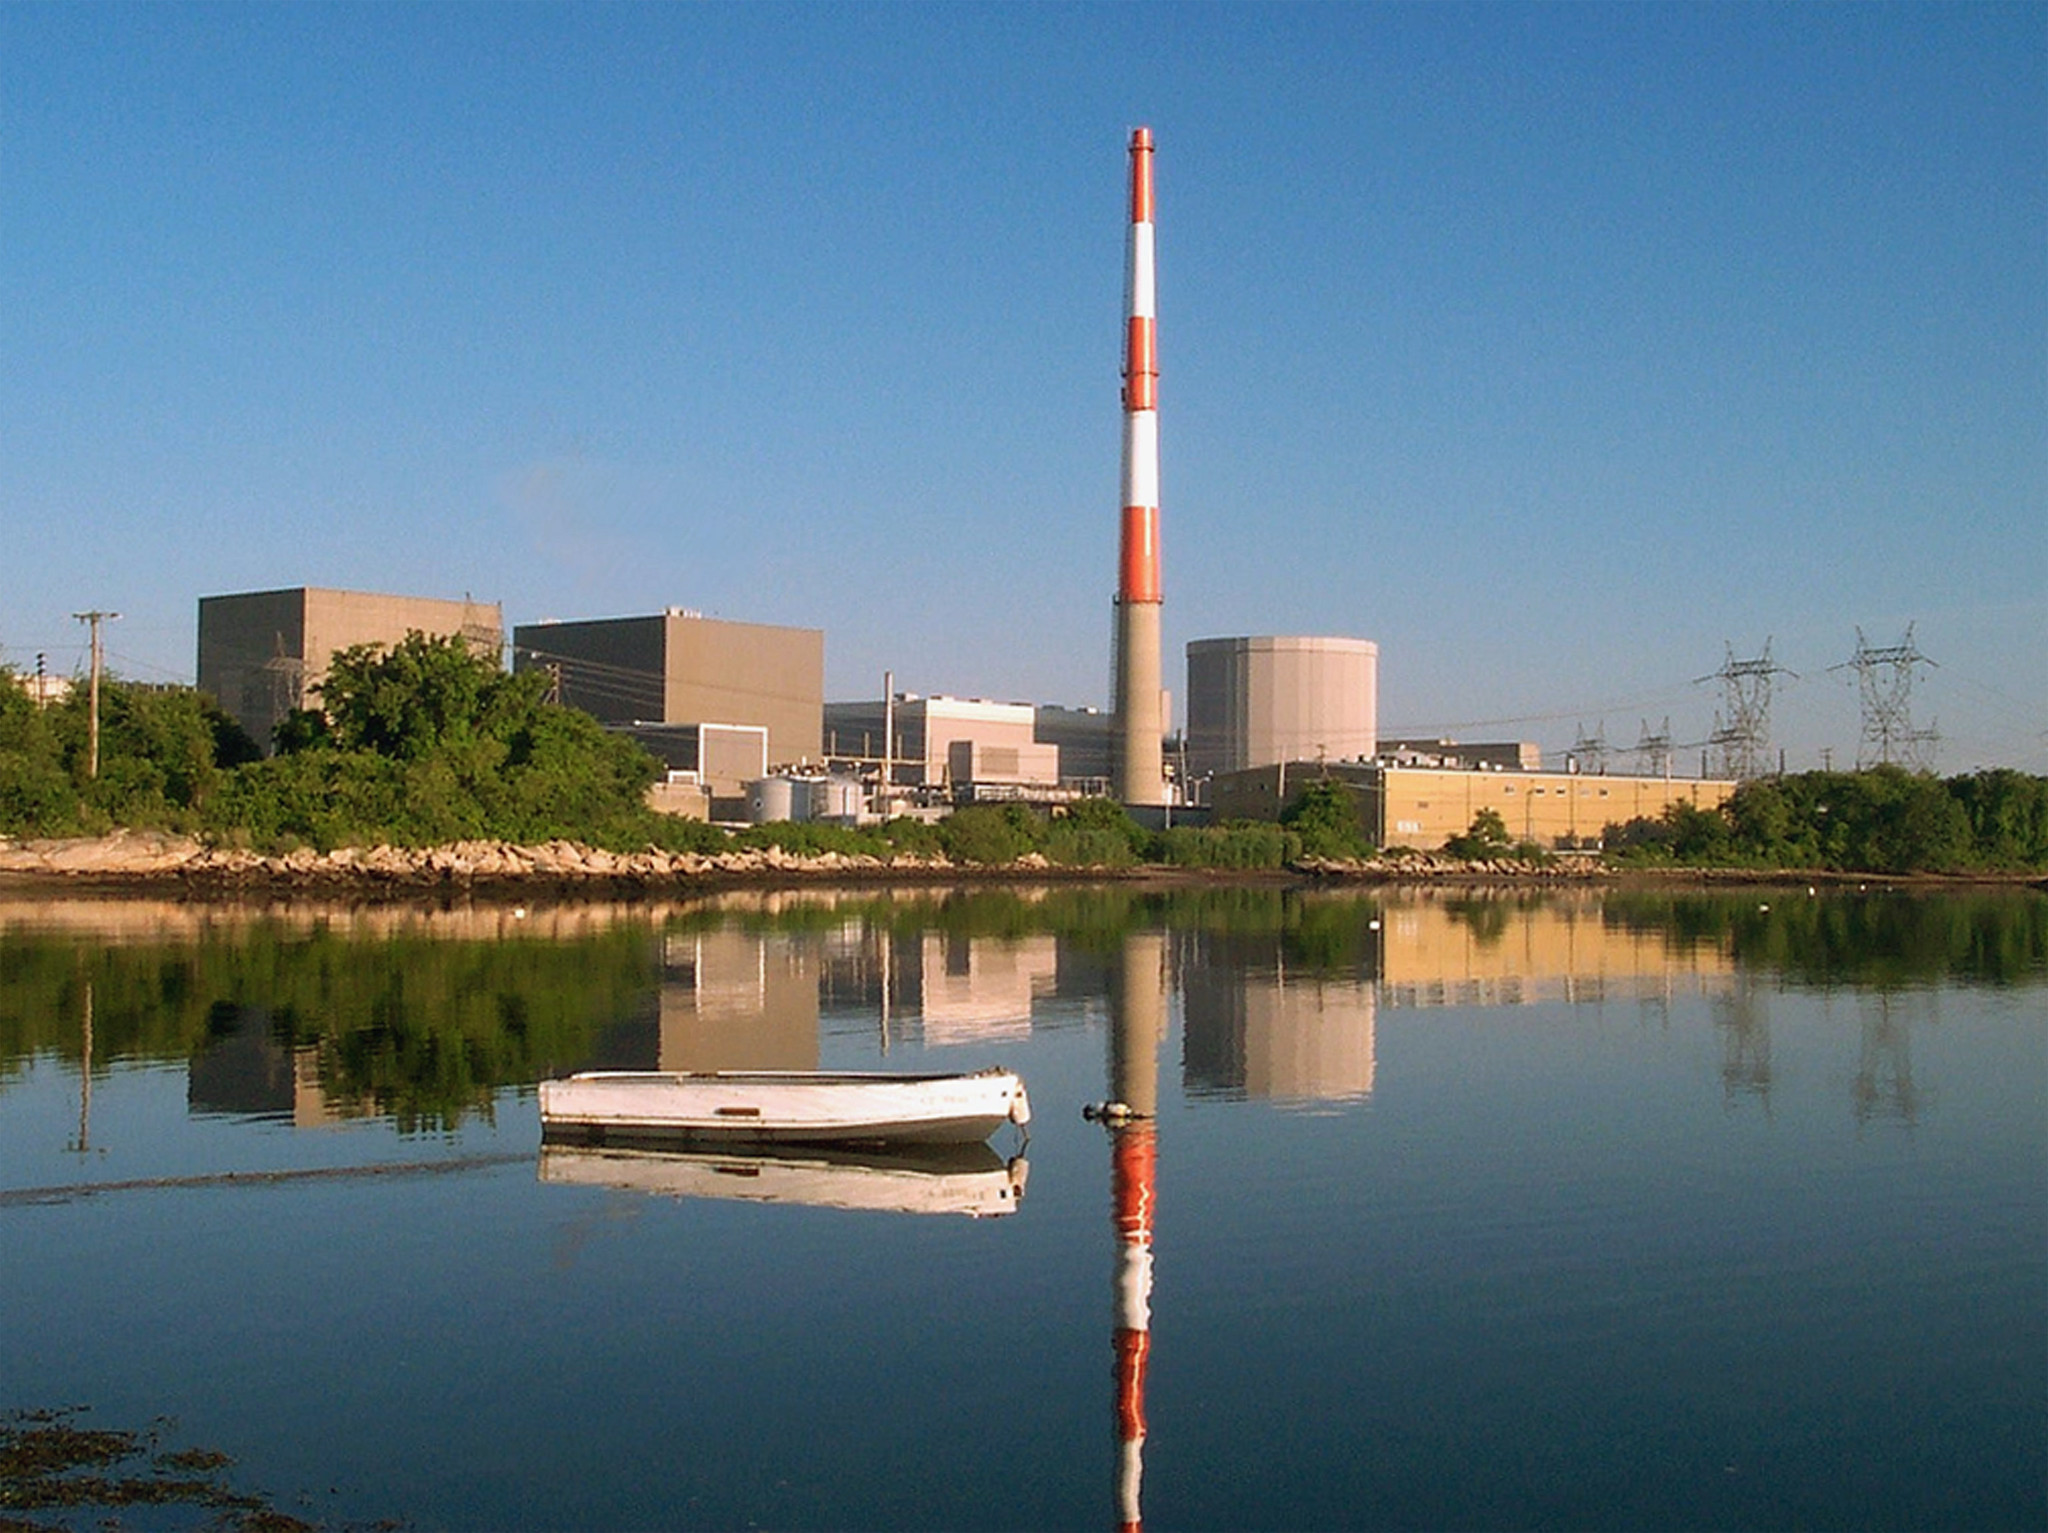 Photograph of the Millstone Power Station, Waterford, Connecticut. The photo shows rectangular buildings, a cylindrical building, and a red and white striped smokestack on the shore net to a body of water.